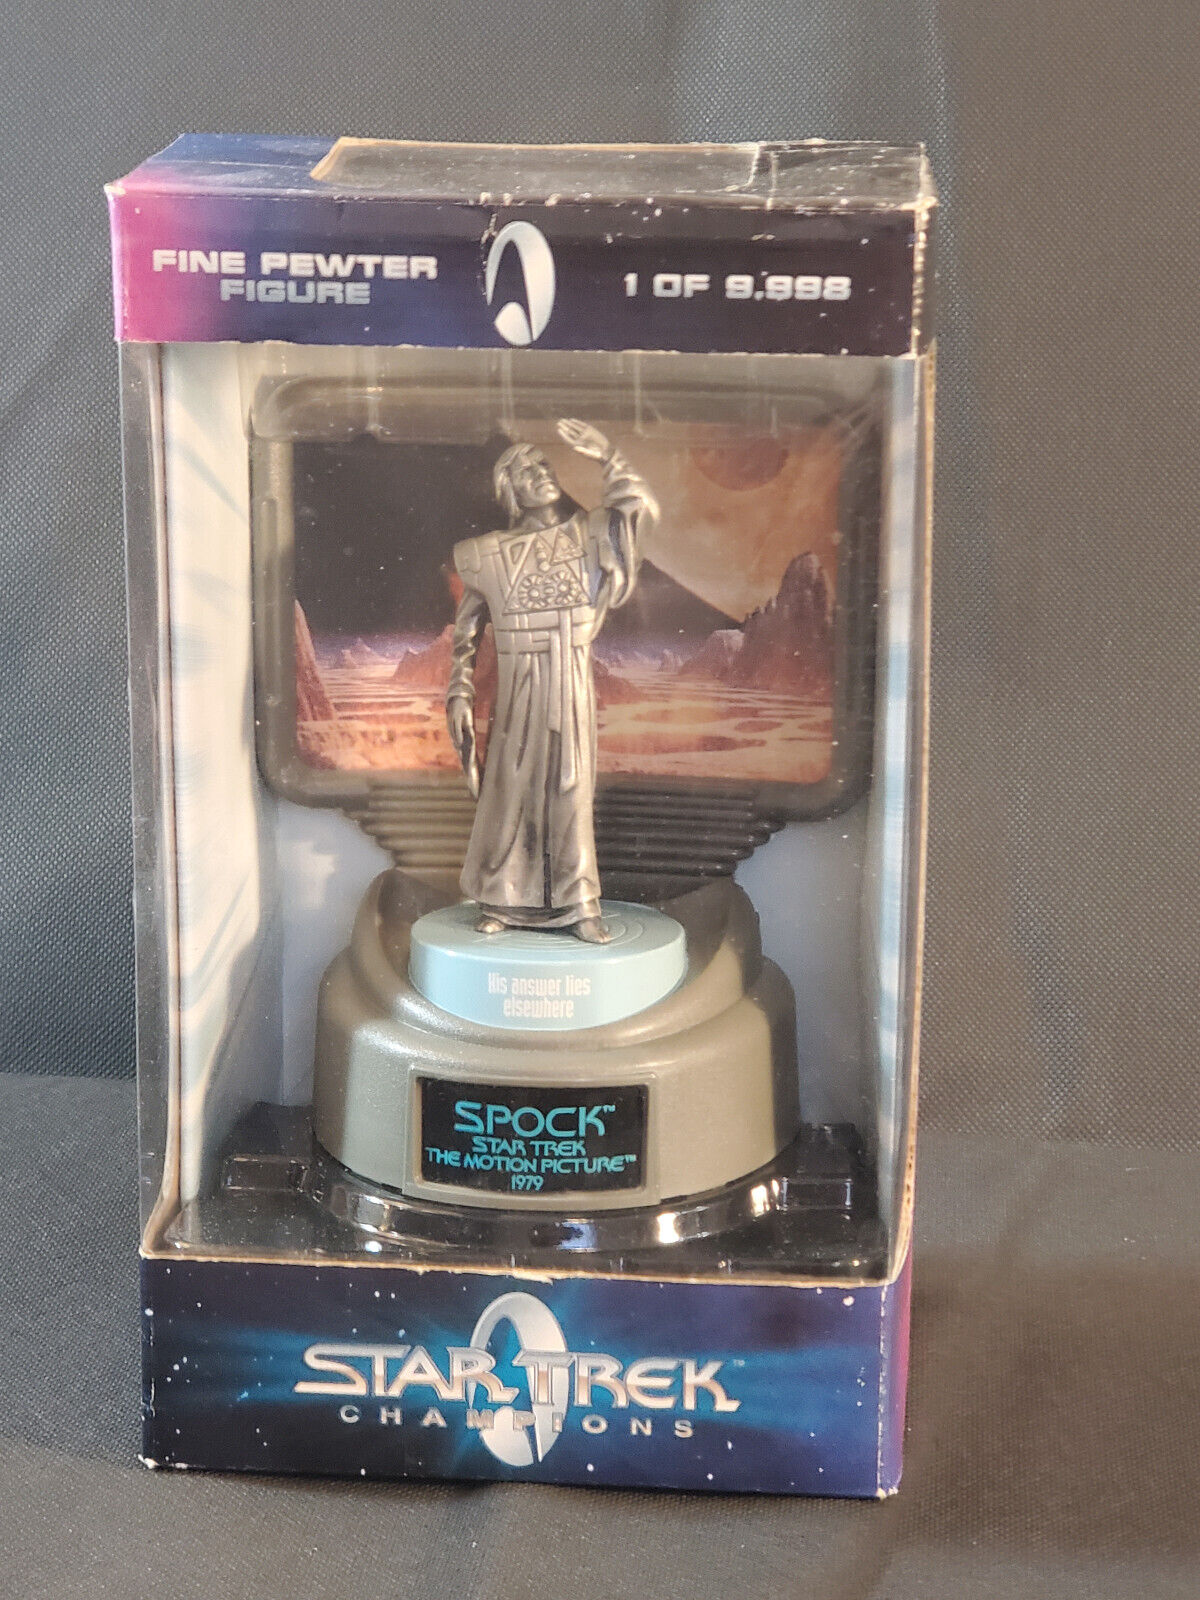 Star Trek Champions 1998 Limited Edition SPOCK Fine Pewter Figure 5958 of 9998